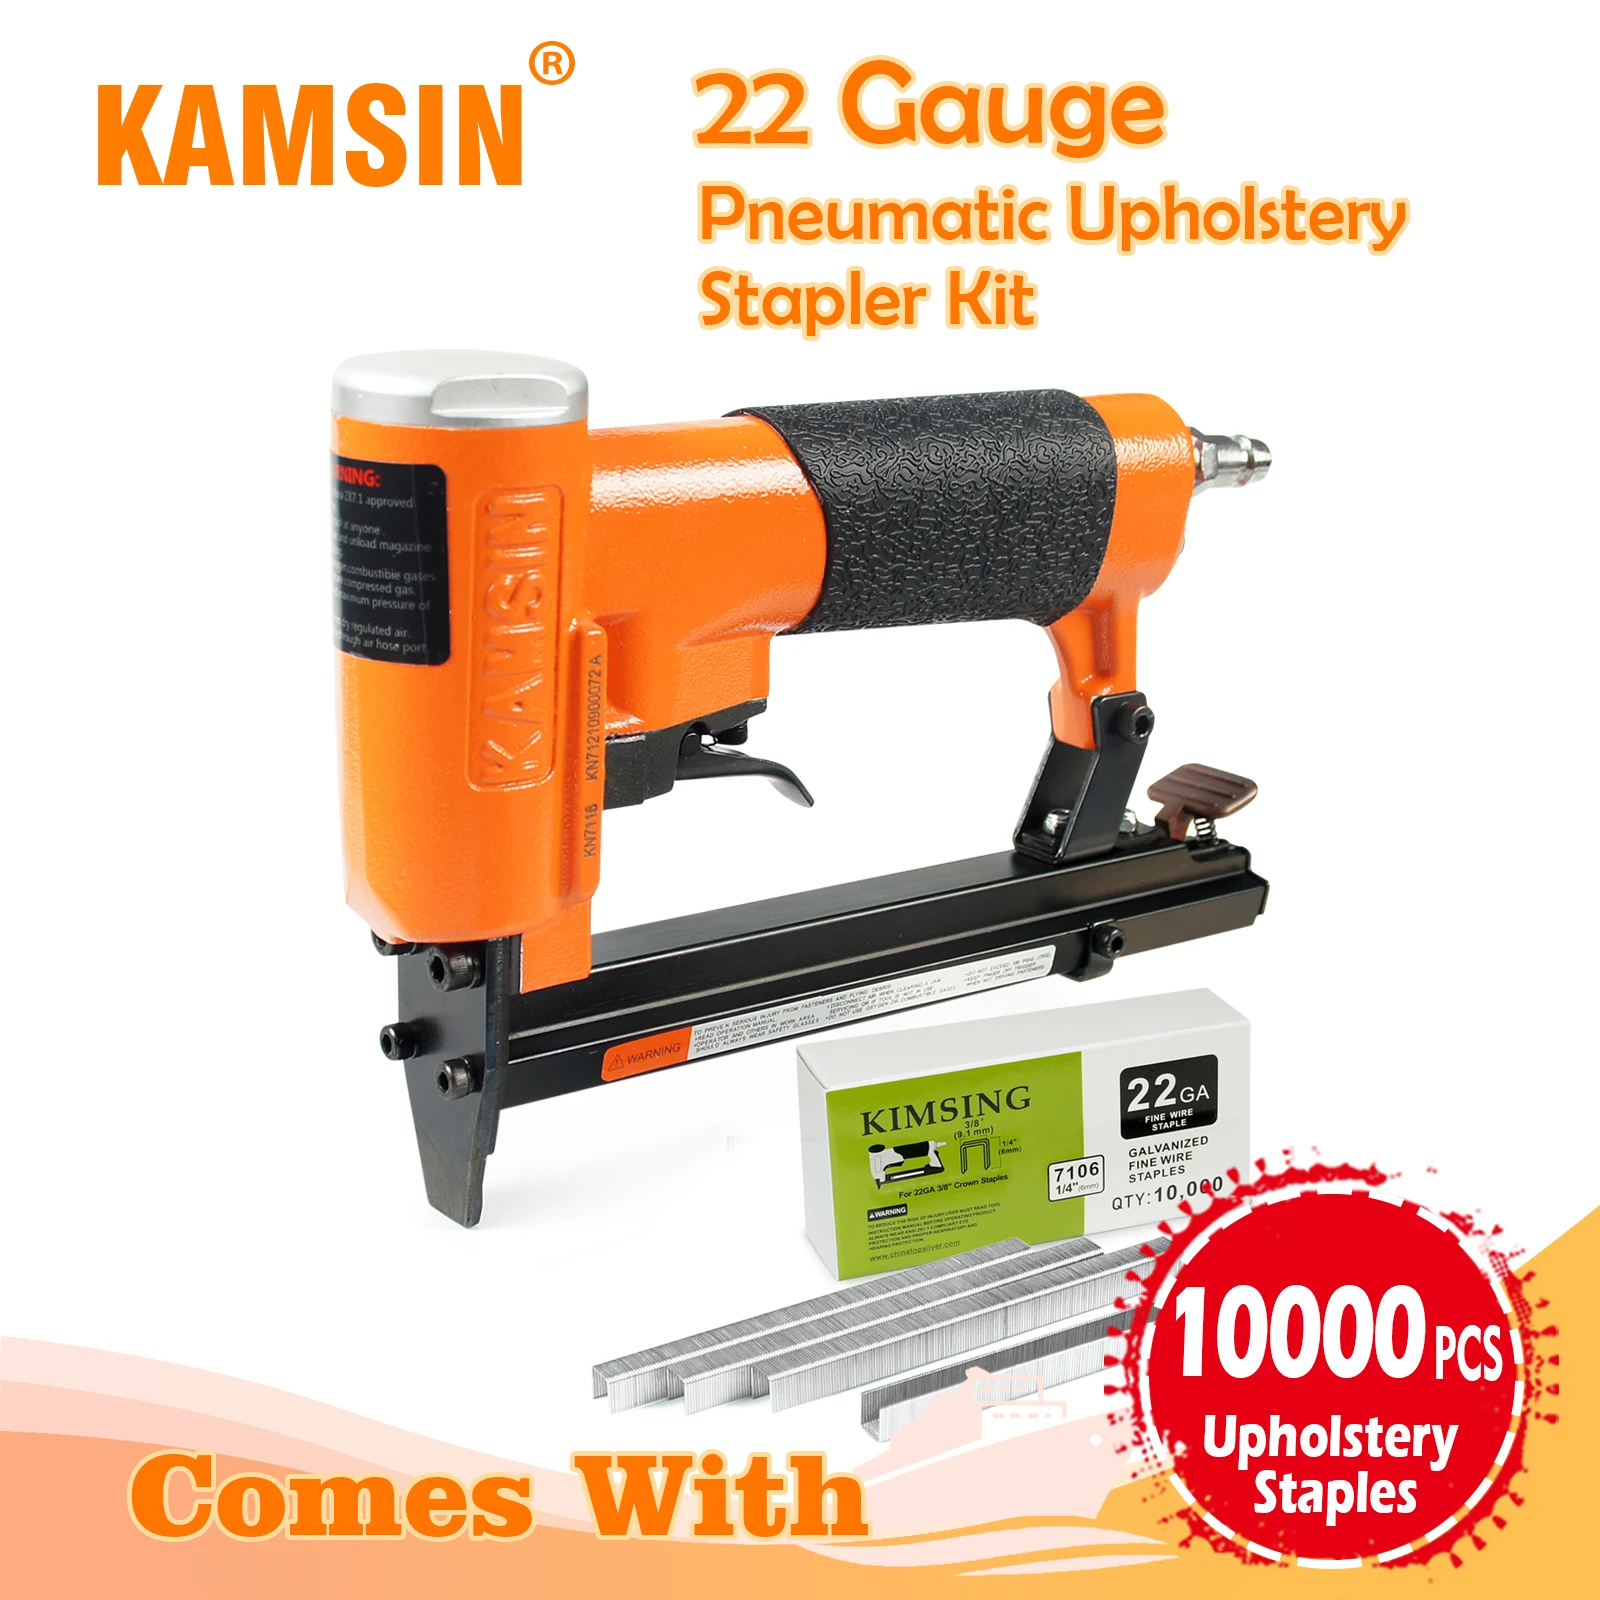 KAMSIN KN7116 22 Gauge Pneumatic Upholstery Stapler Kit Comes with 6mm or 10mm Length 10000 PCS/Box Staples, for Furniture